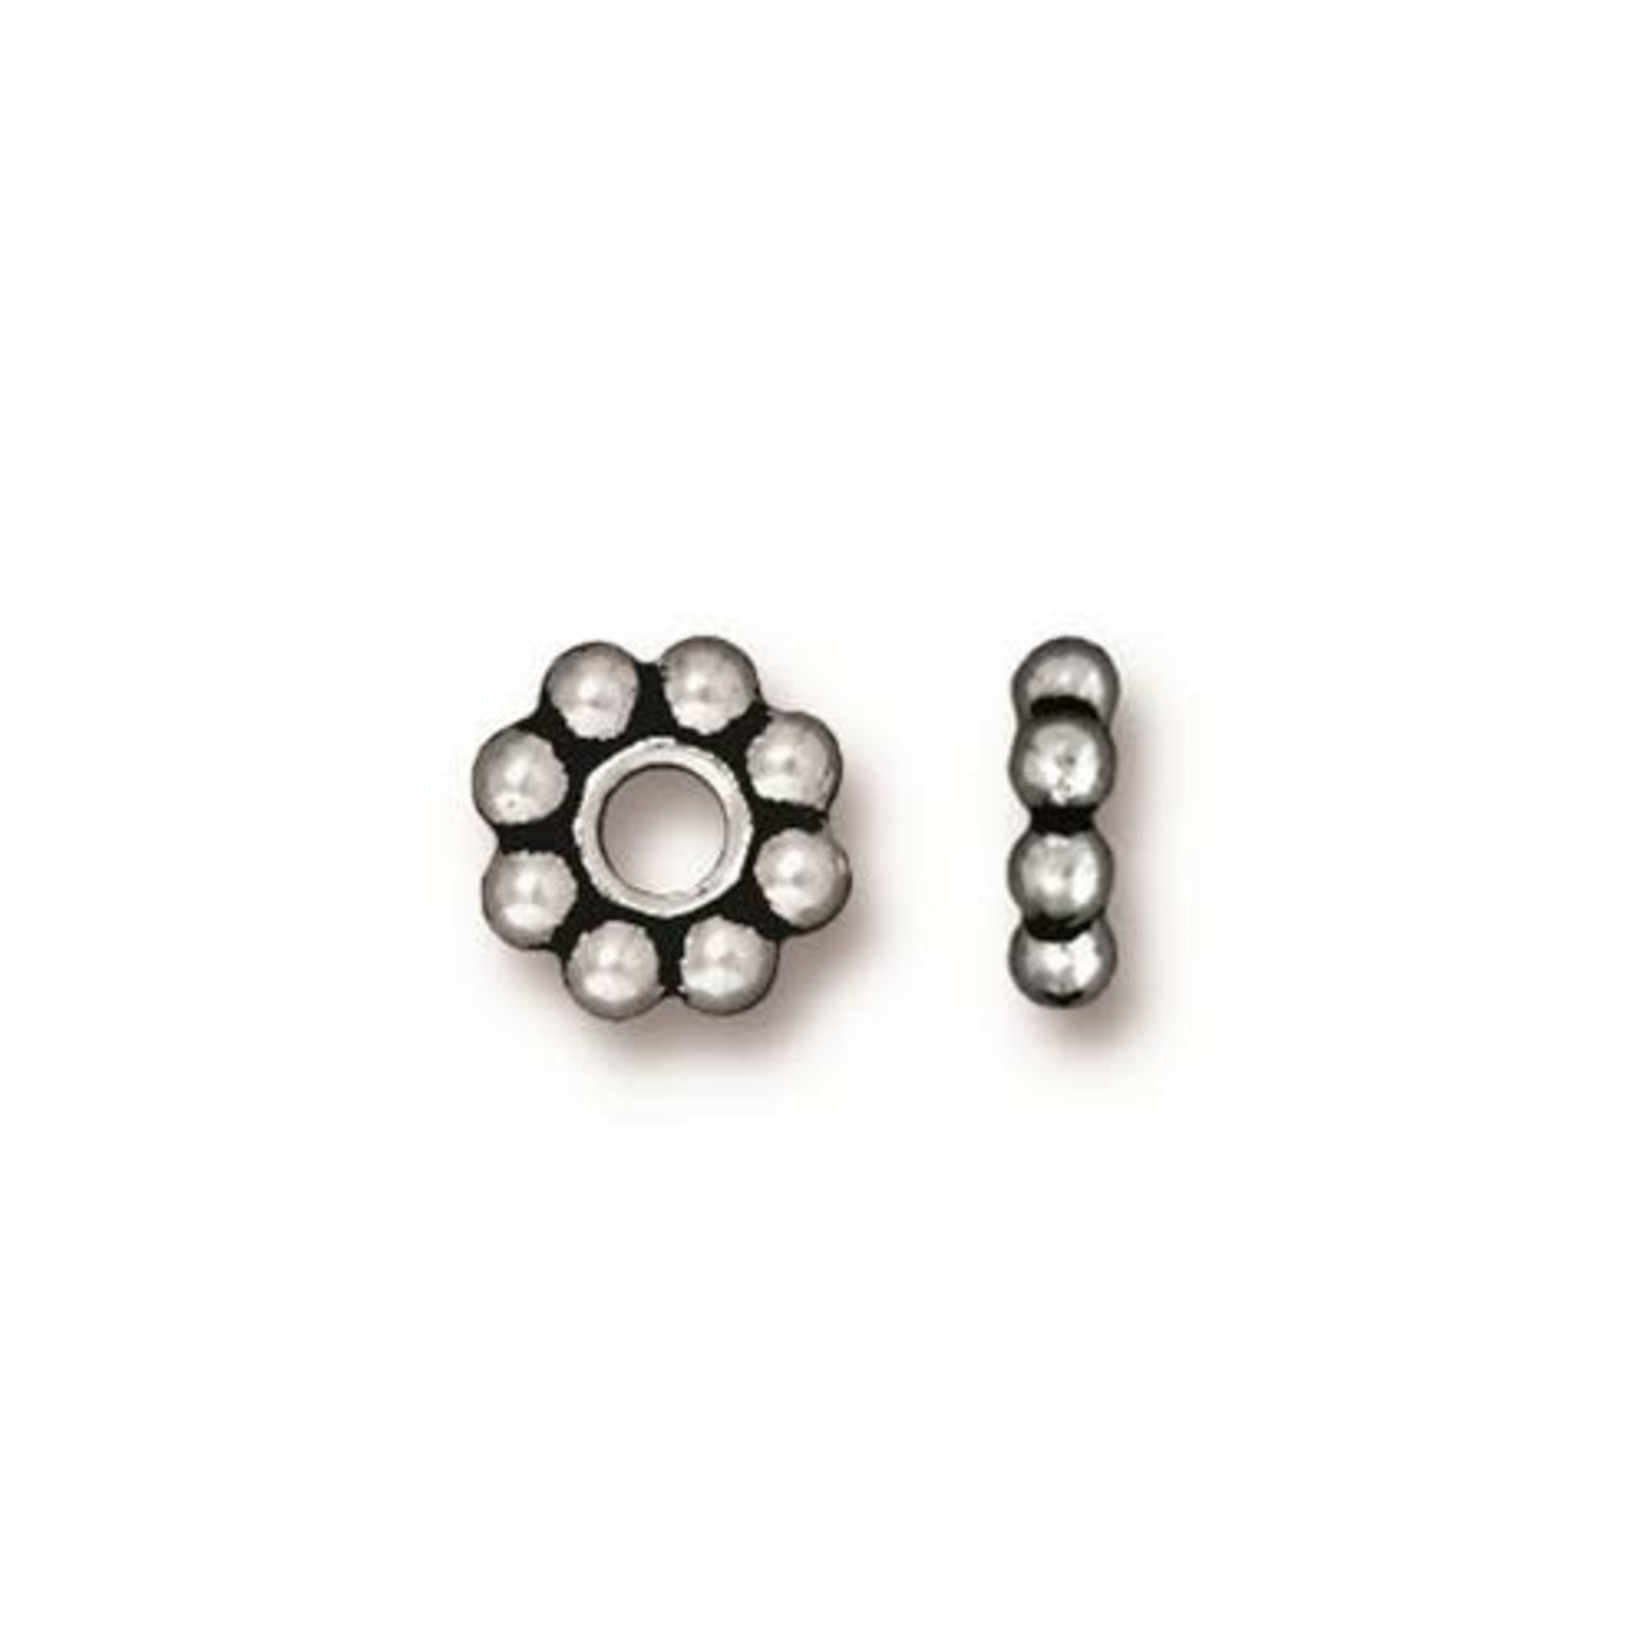 TierraCast Tierracast Antique Silver Plated 8mm Beaded Large Hole Bead